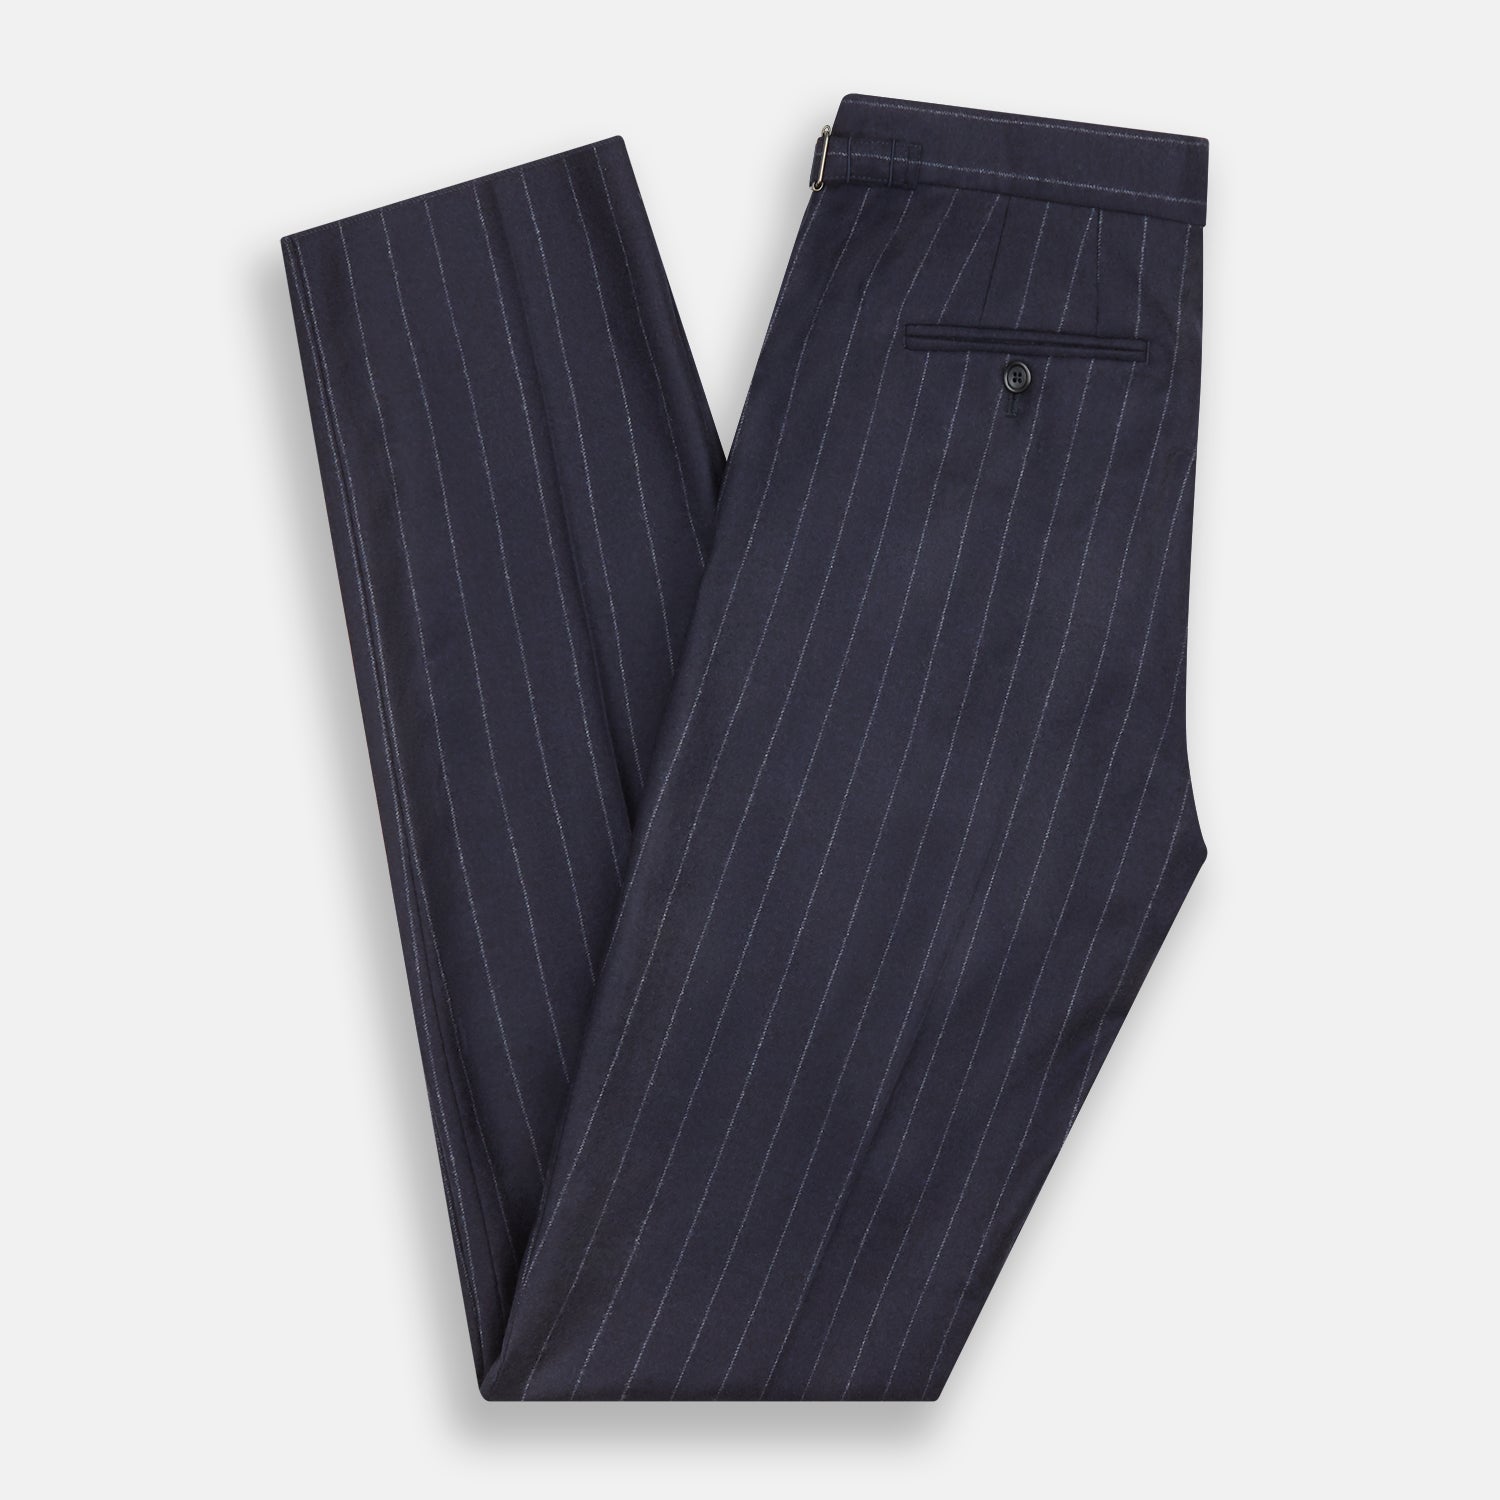 Navy Pinstripe Henry Trousers